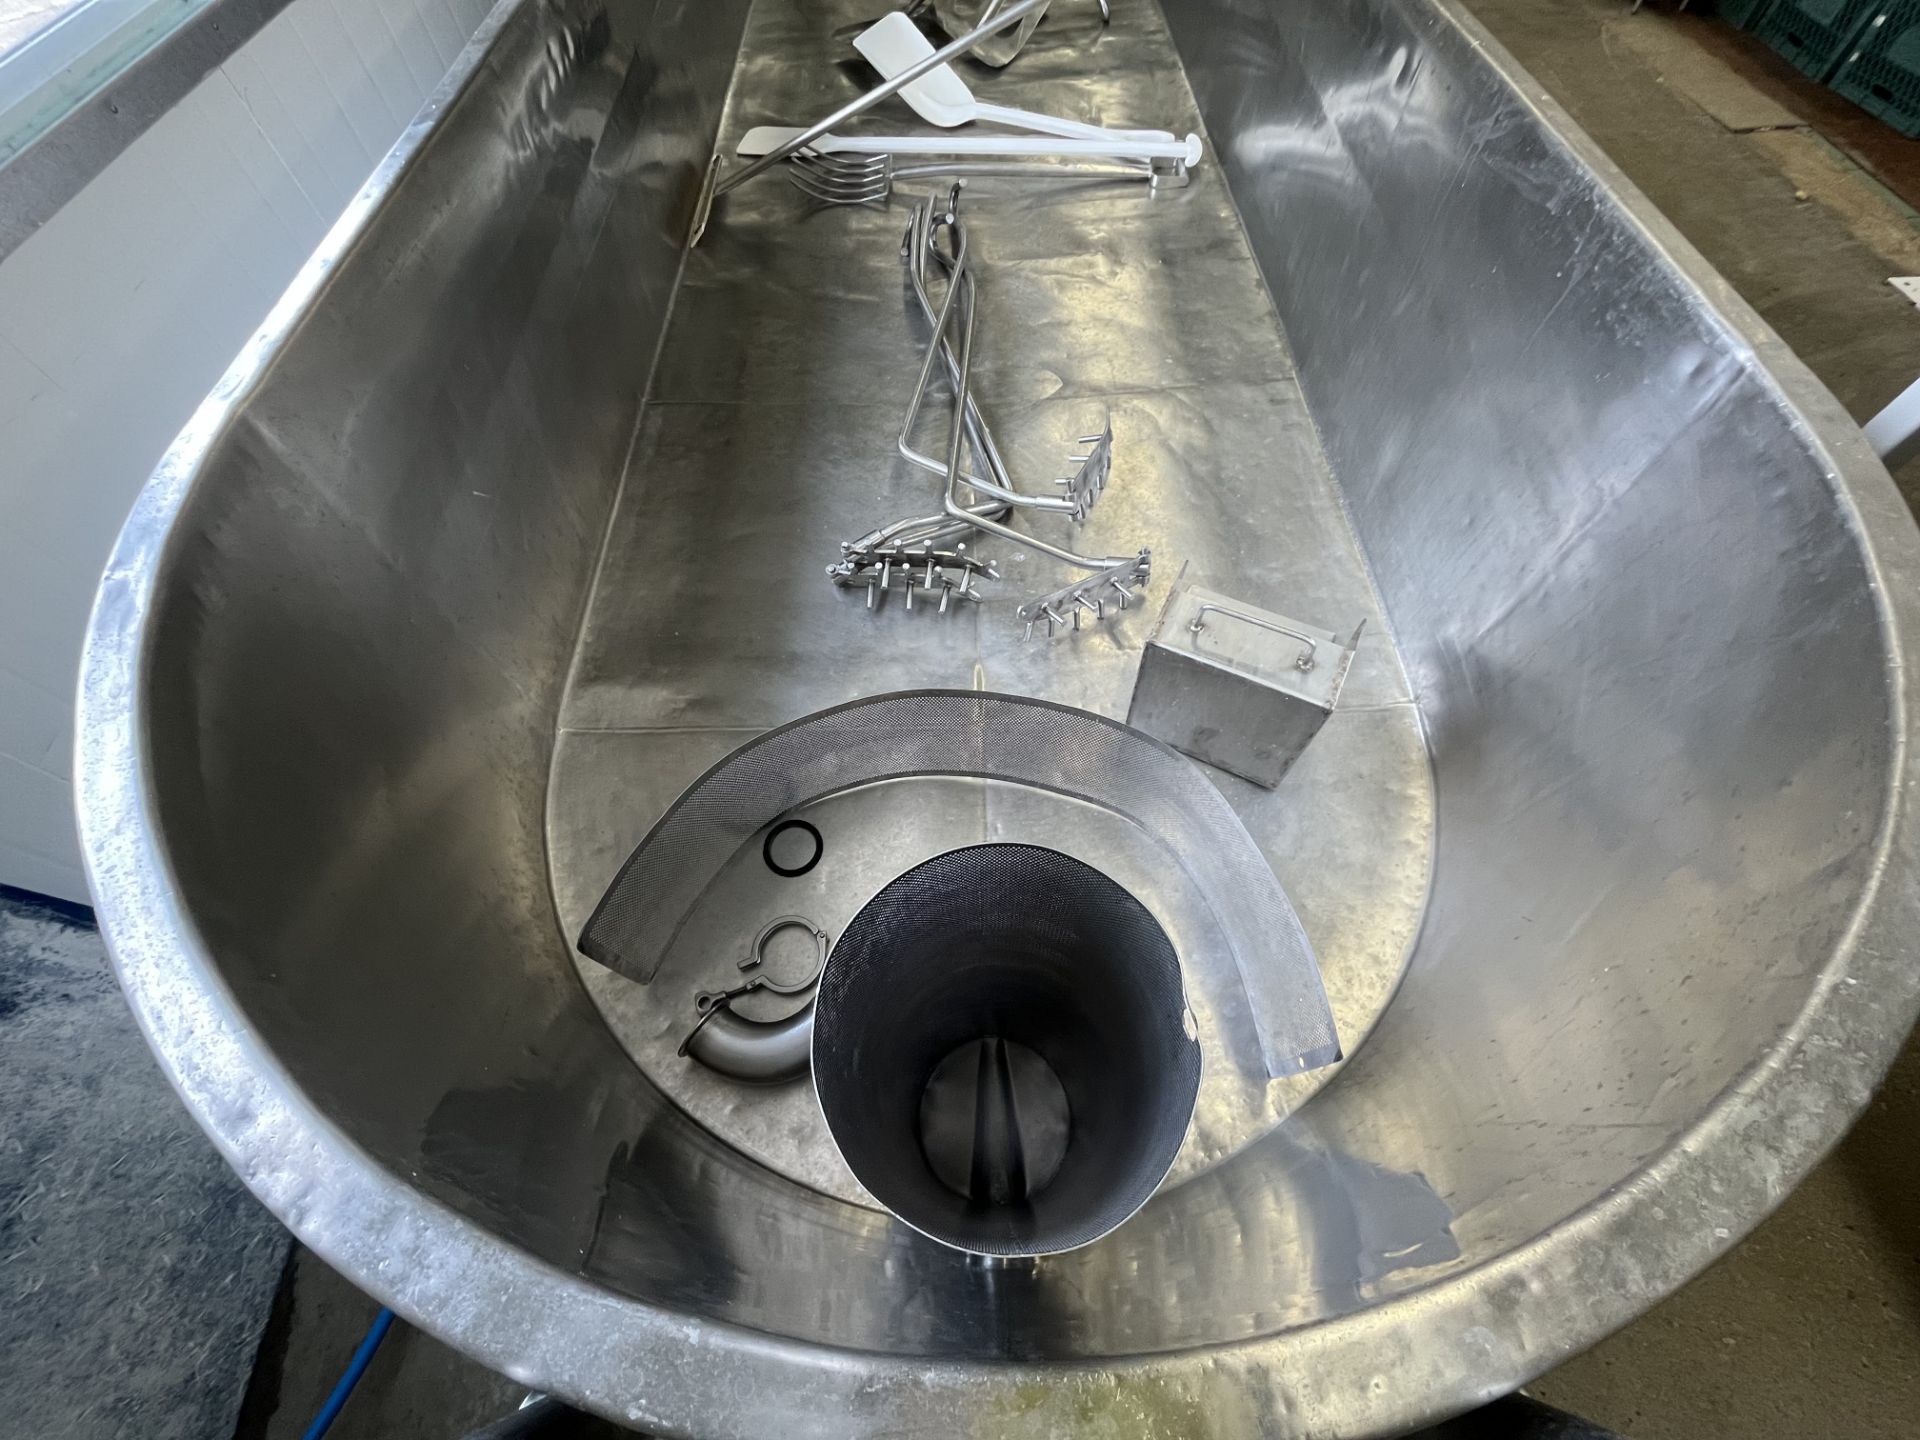 4000L Cheddar Vat with agitator and curd mixer, dimple plate and utensils - Image 18 of 24